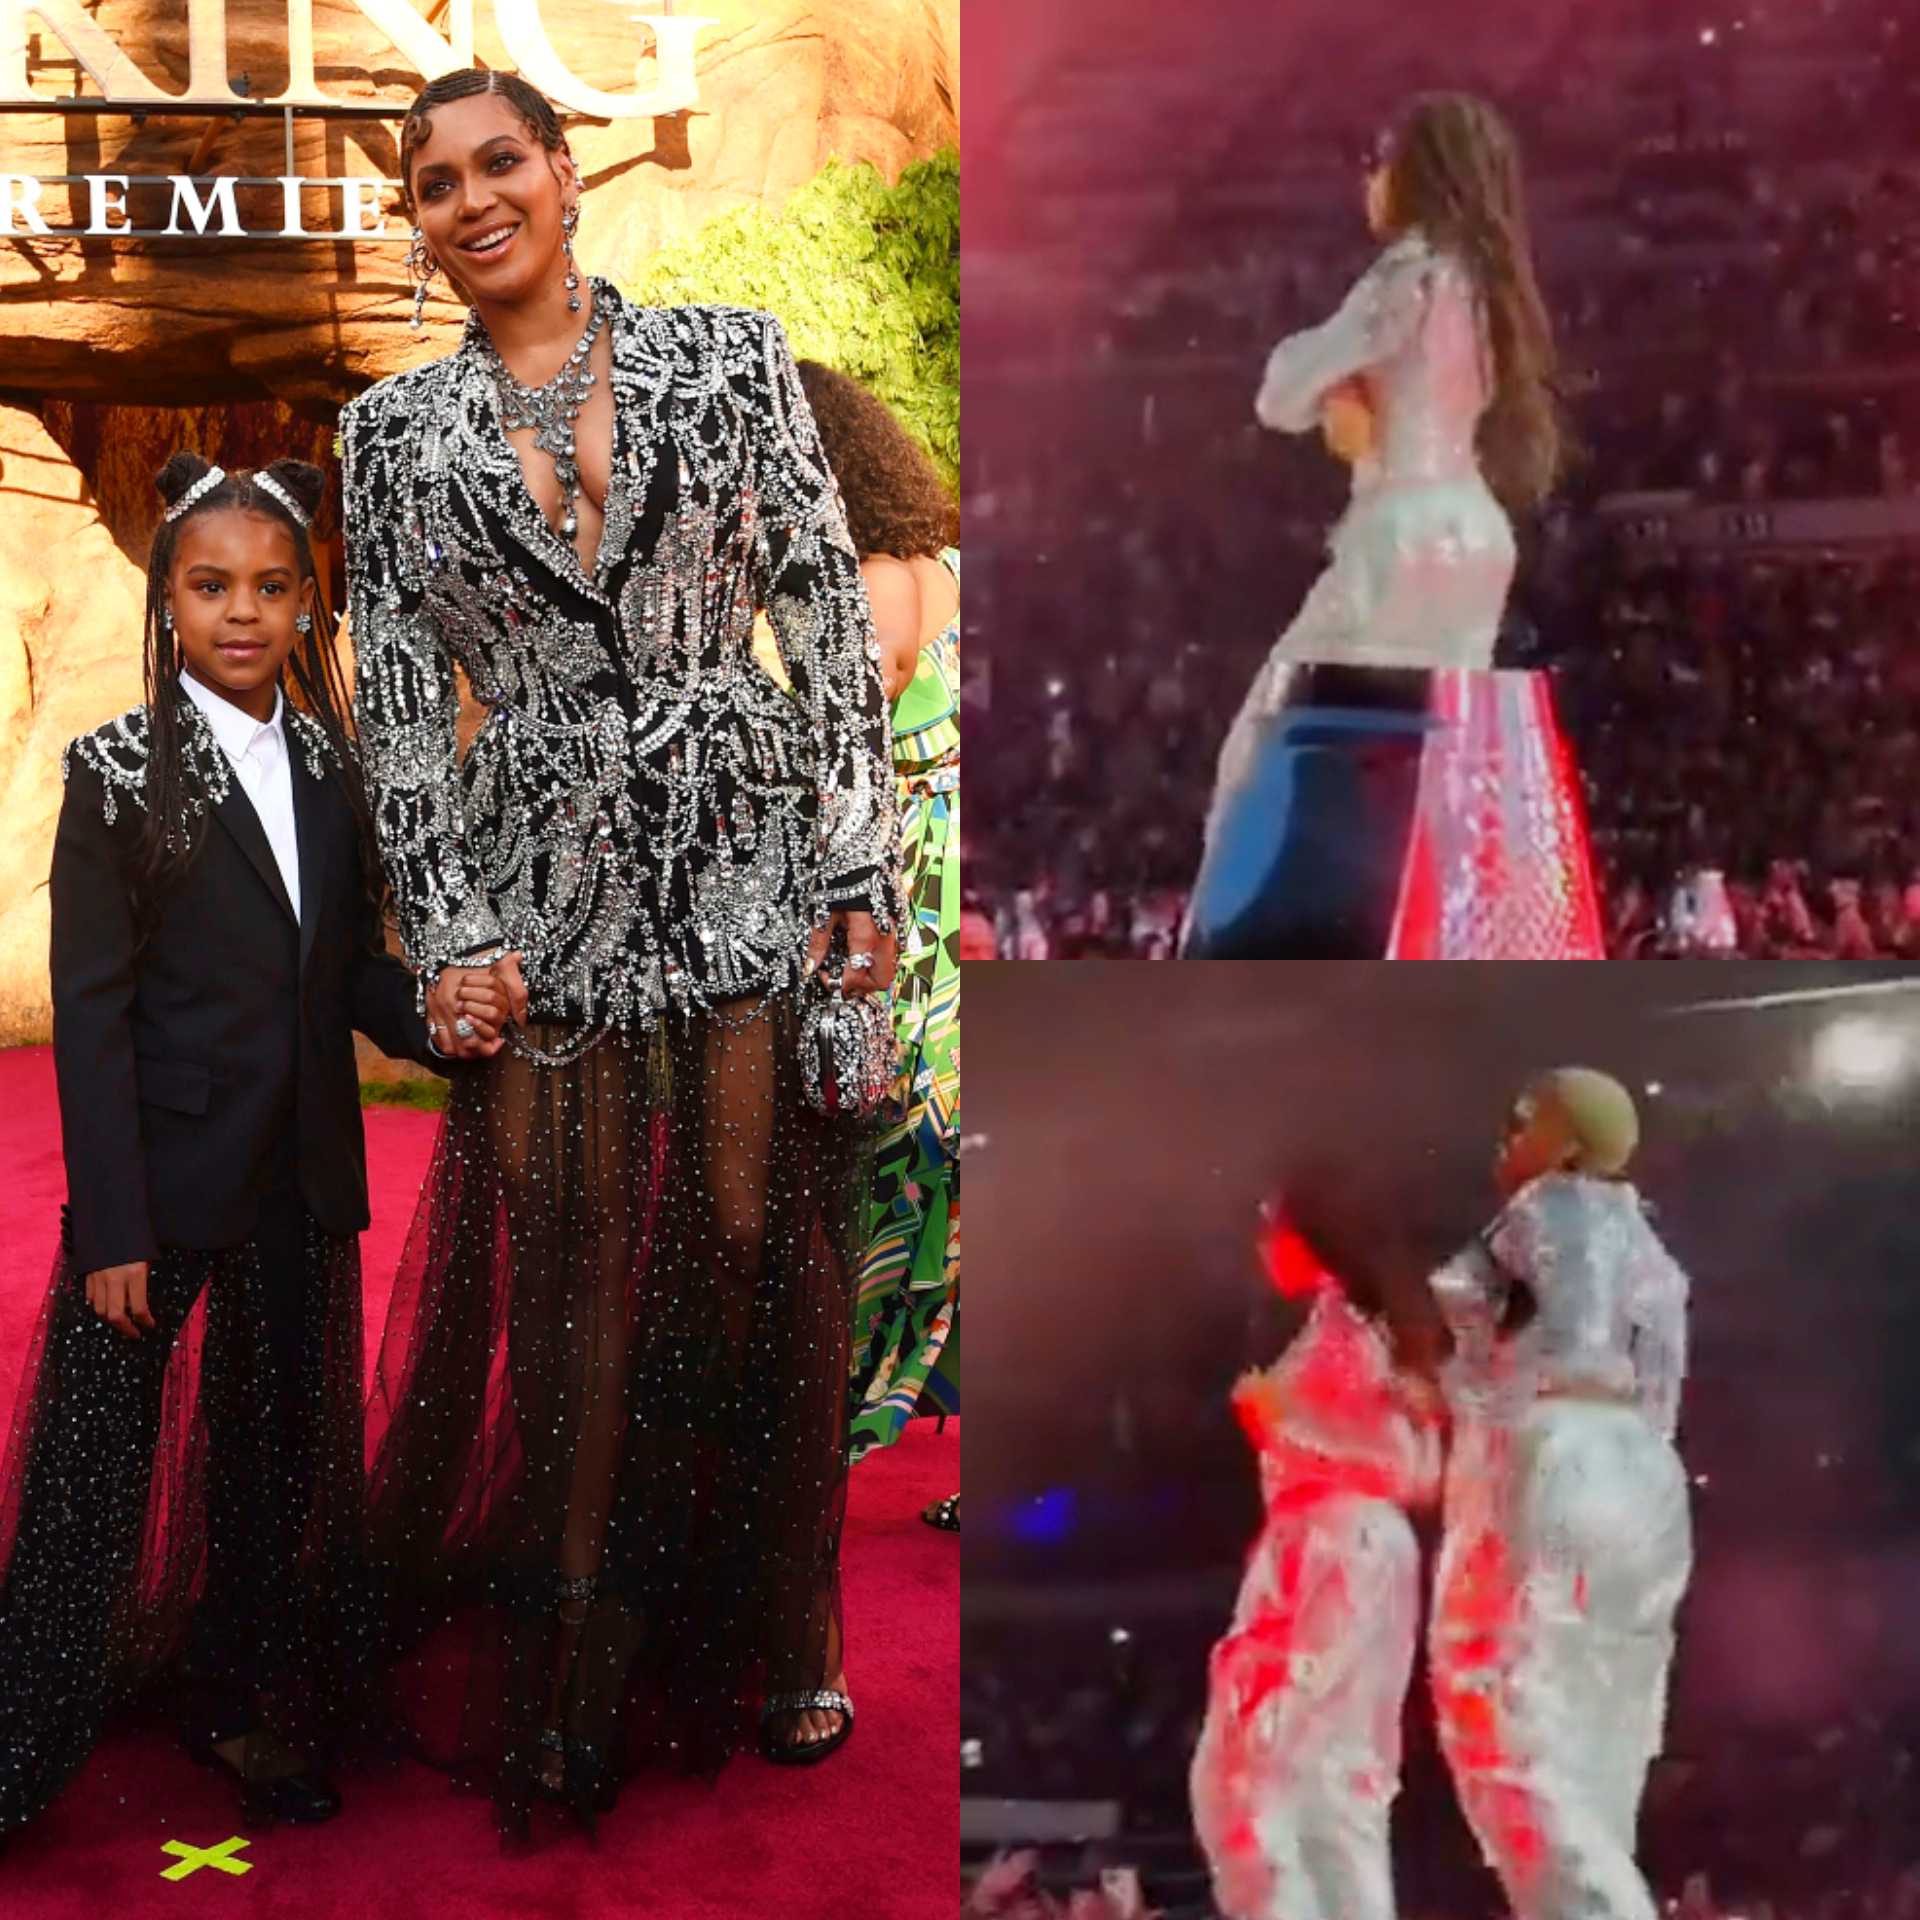 Beyonce and Jay Z daughter perform on stage